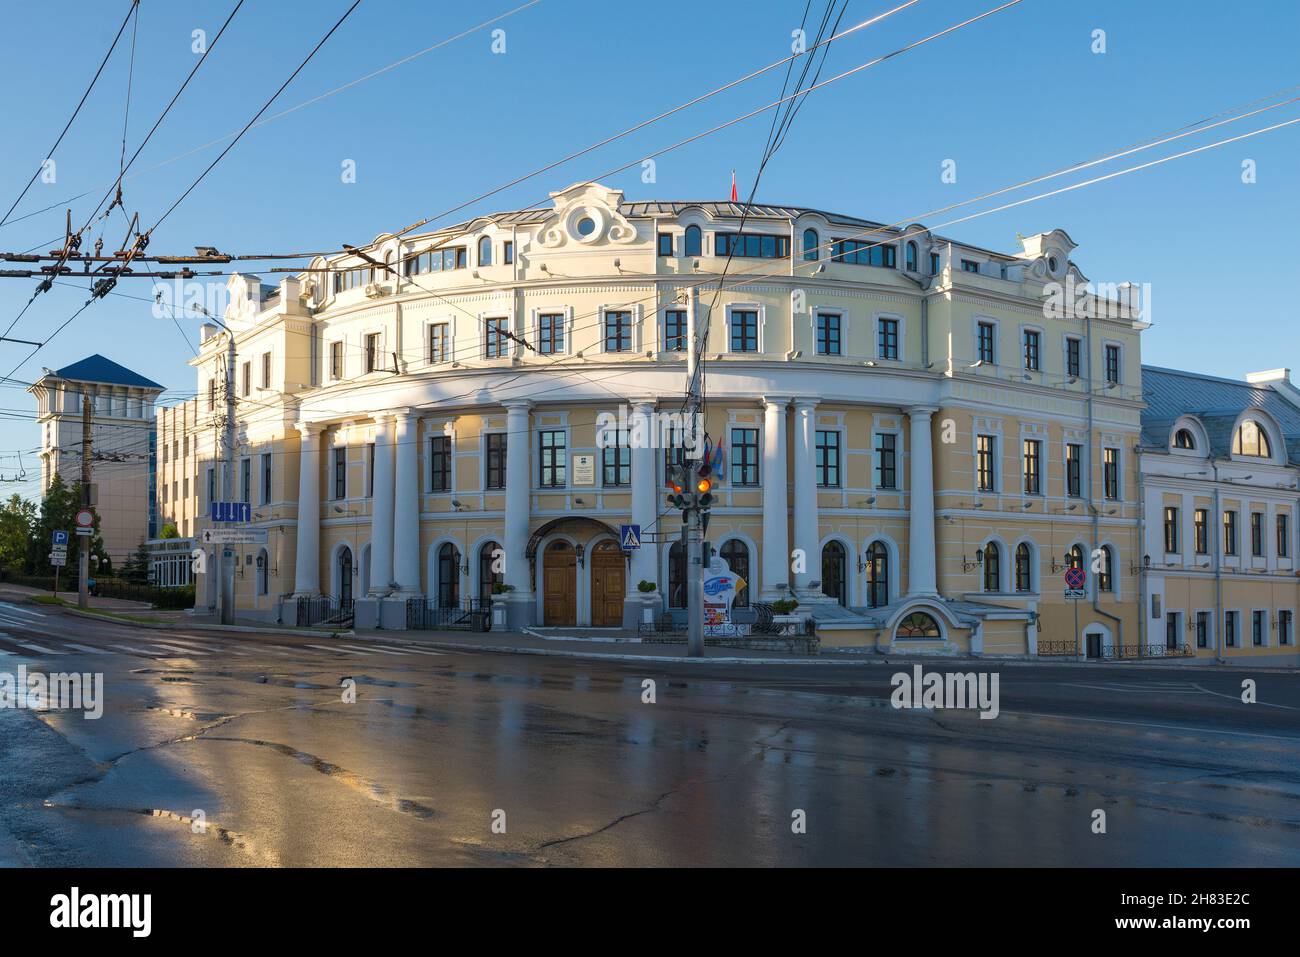 KALUGA, RUSSIA - JULY 07, 2021: The ancient building of the 18th century, in which the city government is now located, in the early July morning Stock Photo